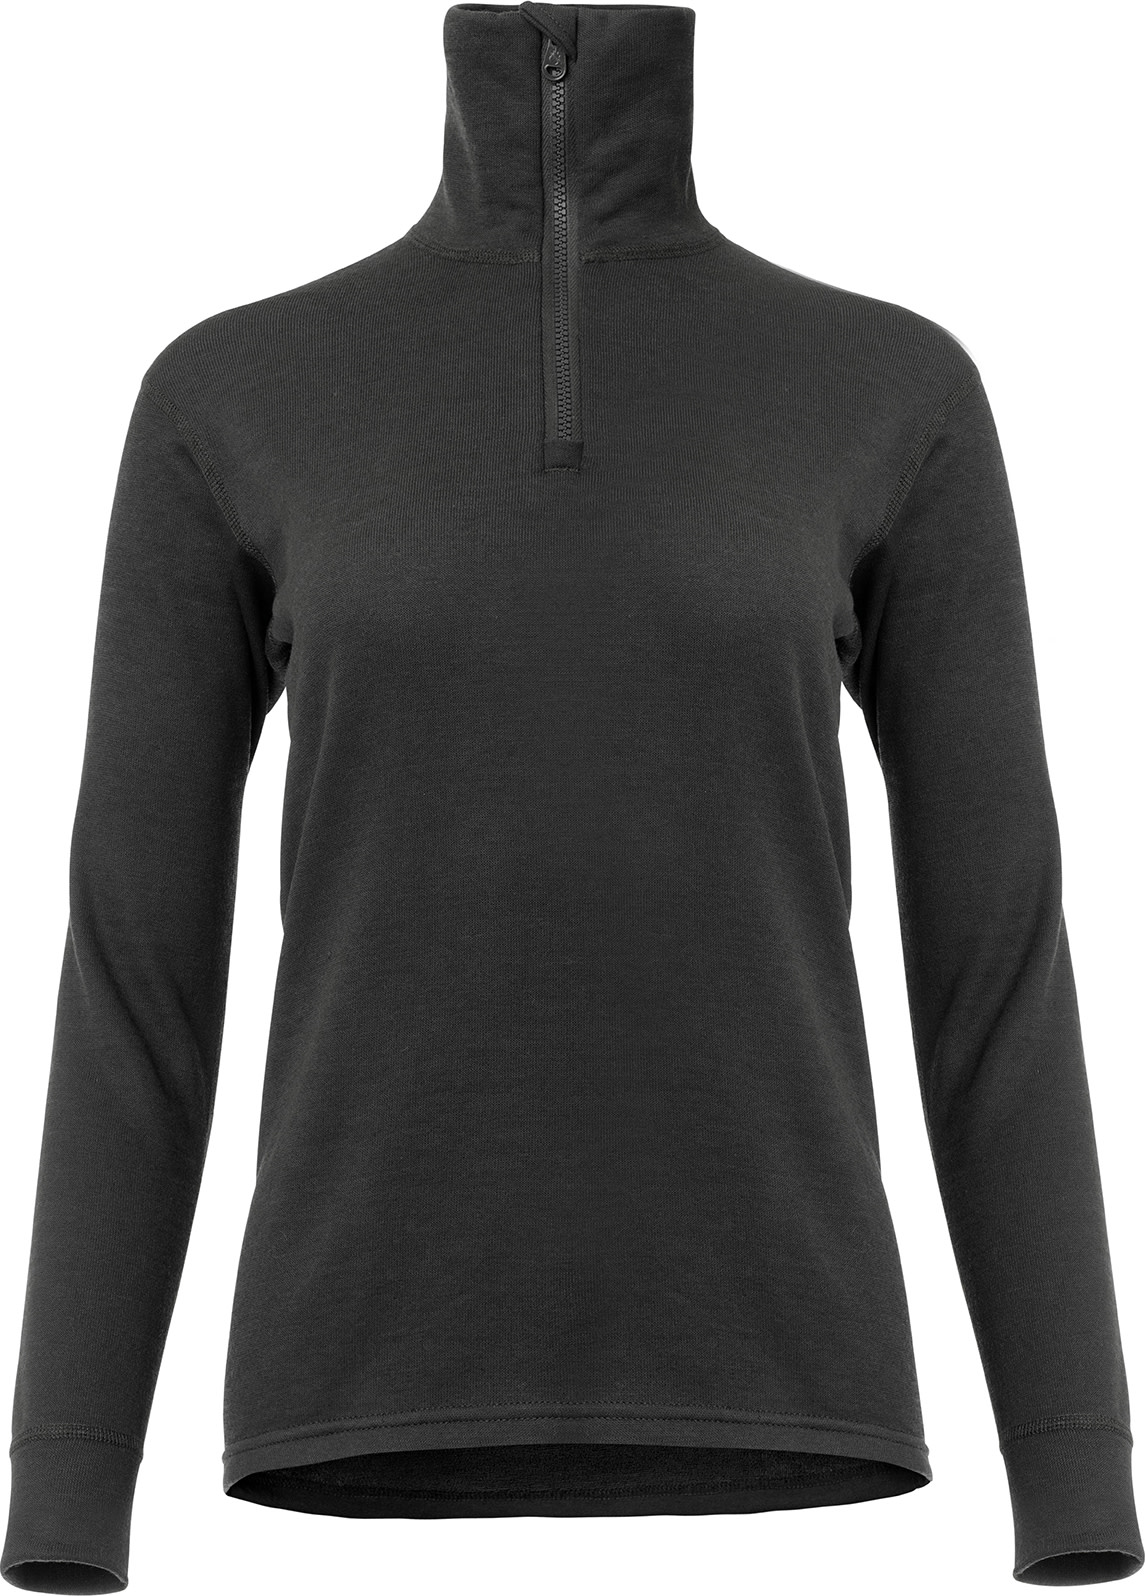 aclima Women’s WoolTerry Polo Jet Black